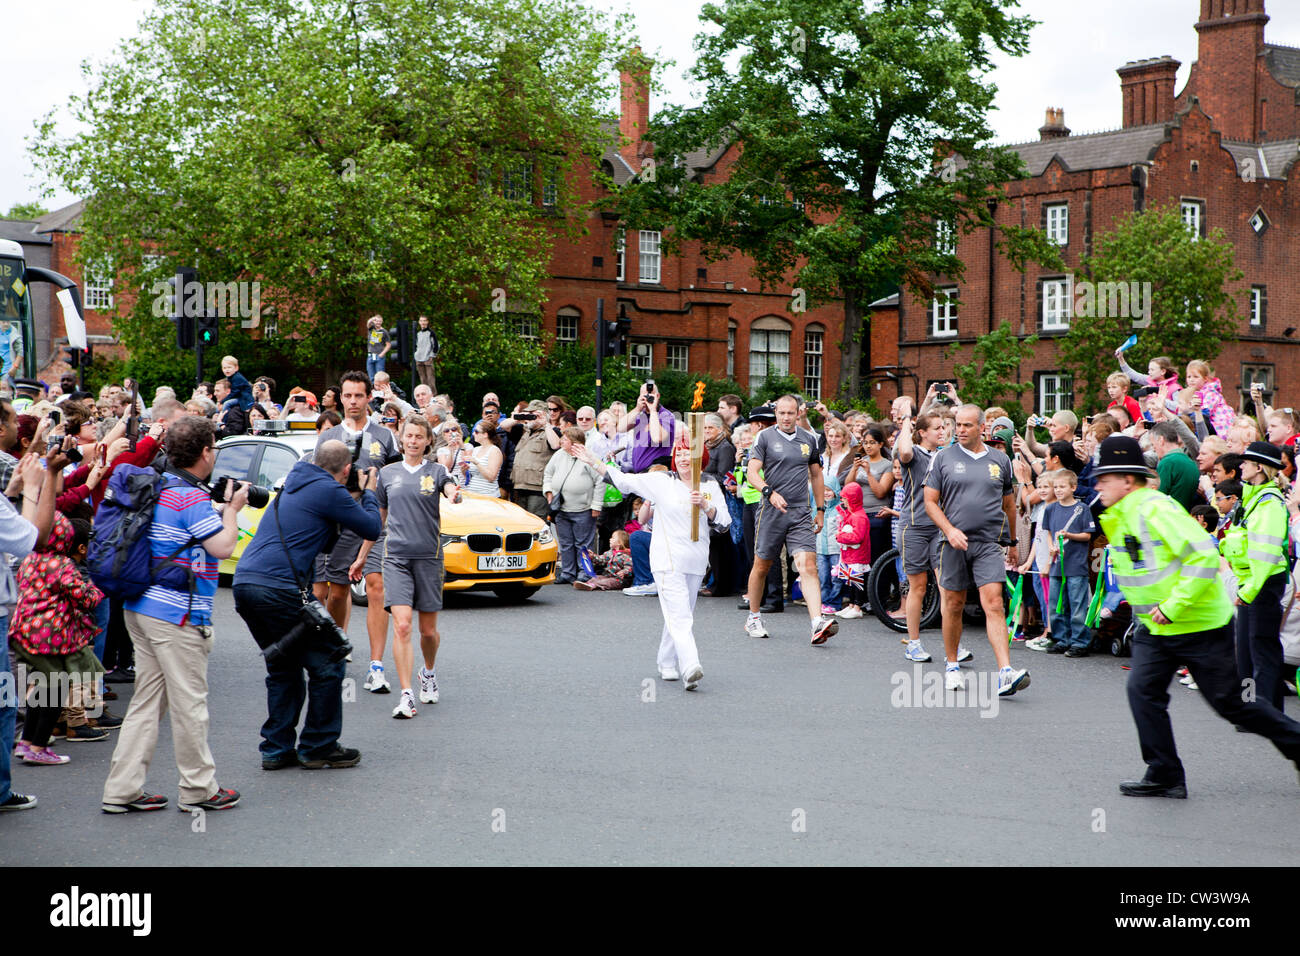 An Olympic Torch bearer waving to crowds in Walsall, West Midlands as part of the London 2012 Olympic Torch Relay Route. Stock Photo